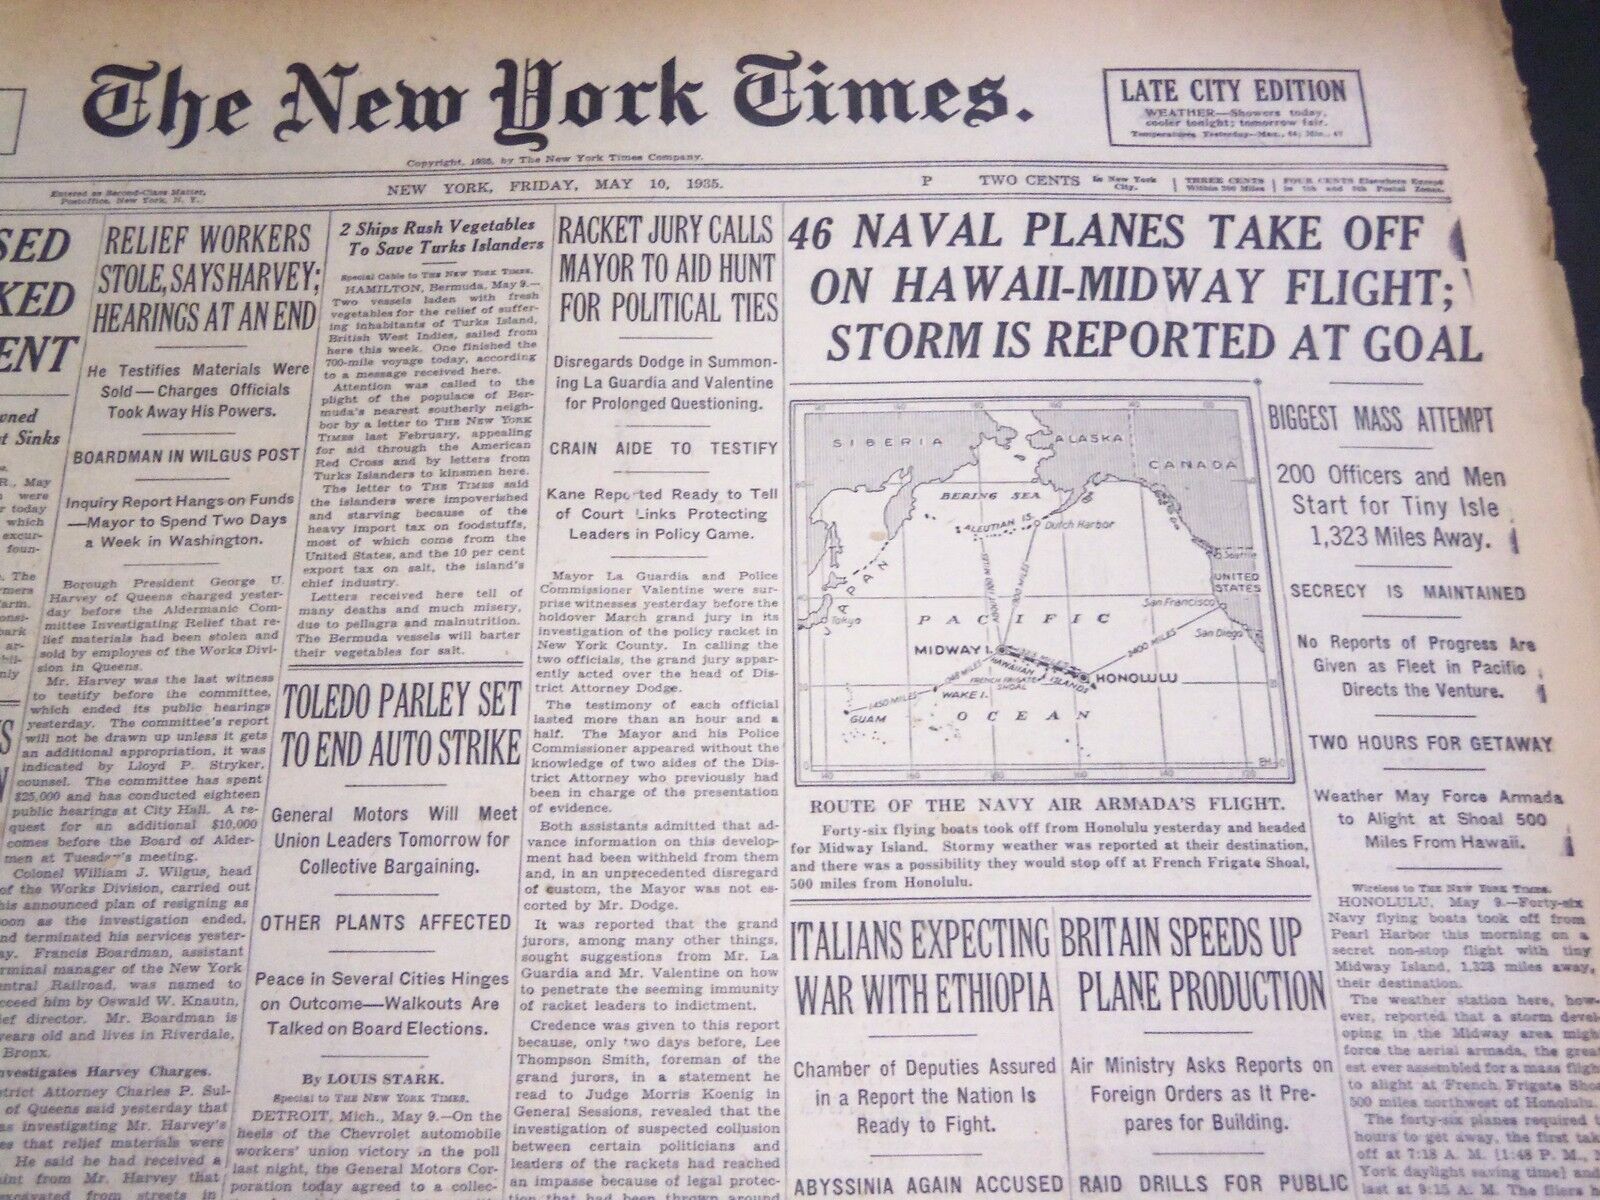 1935 MAY 10 NEW YORK TIMES - 46 NAVAL PLANES OFF ON HAWAII - NT 4878